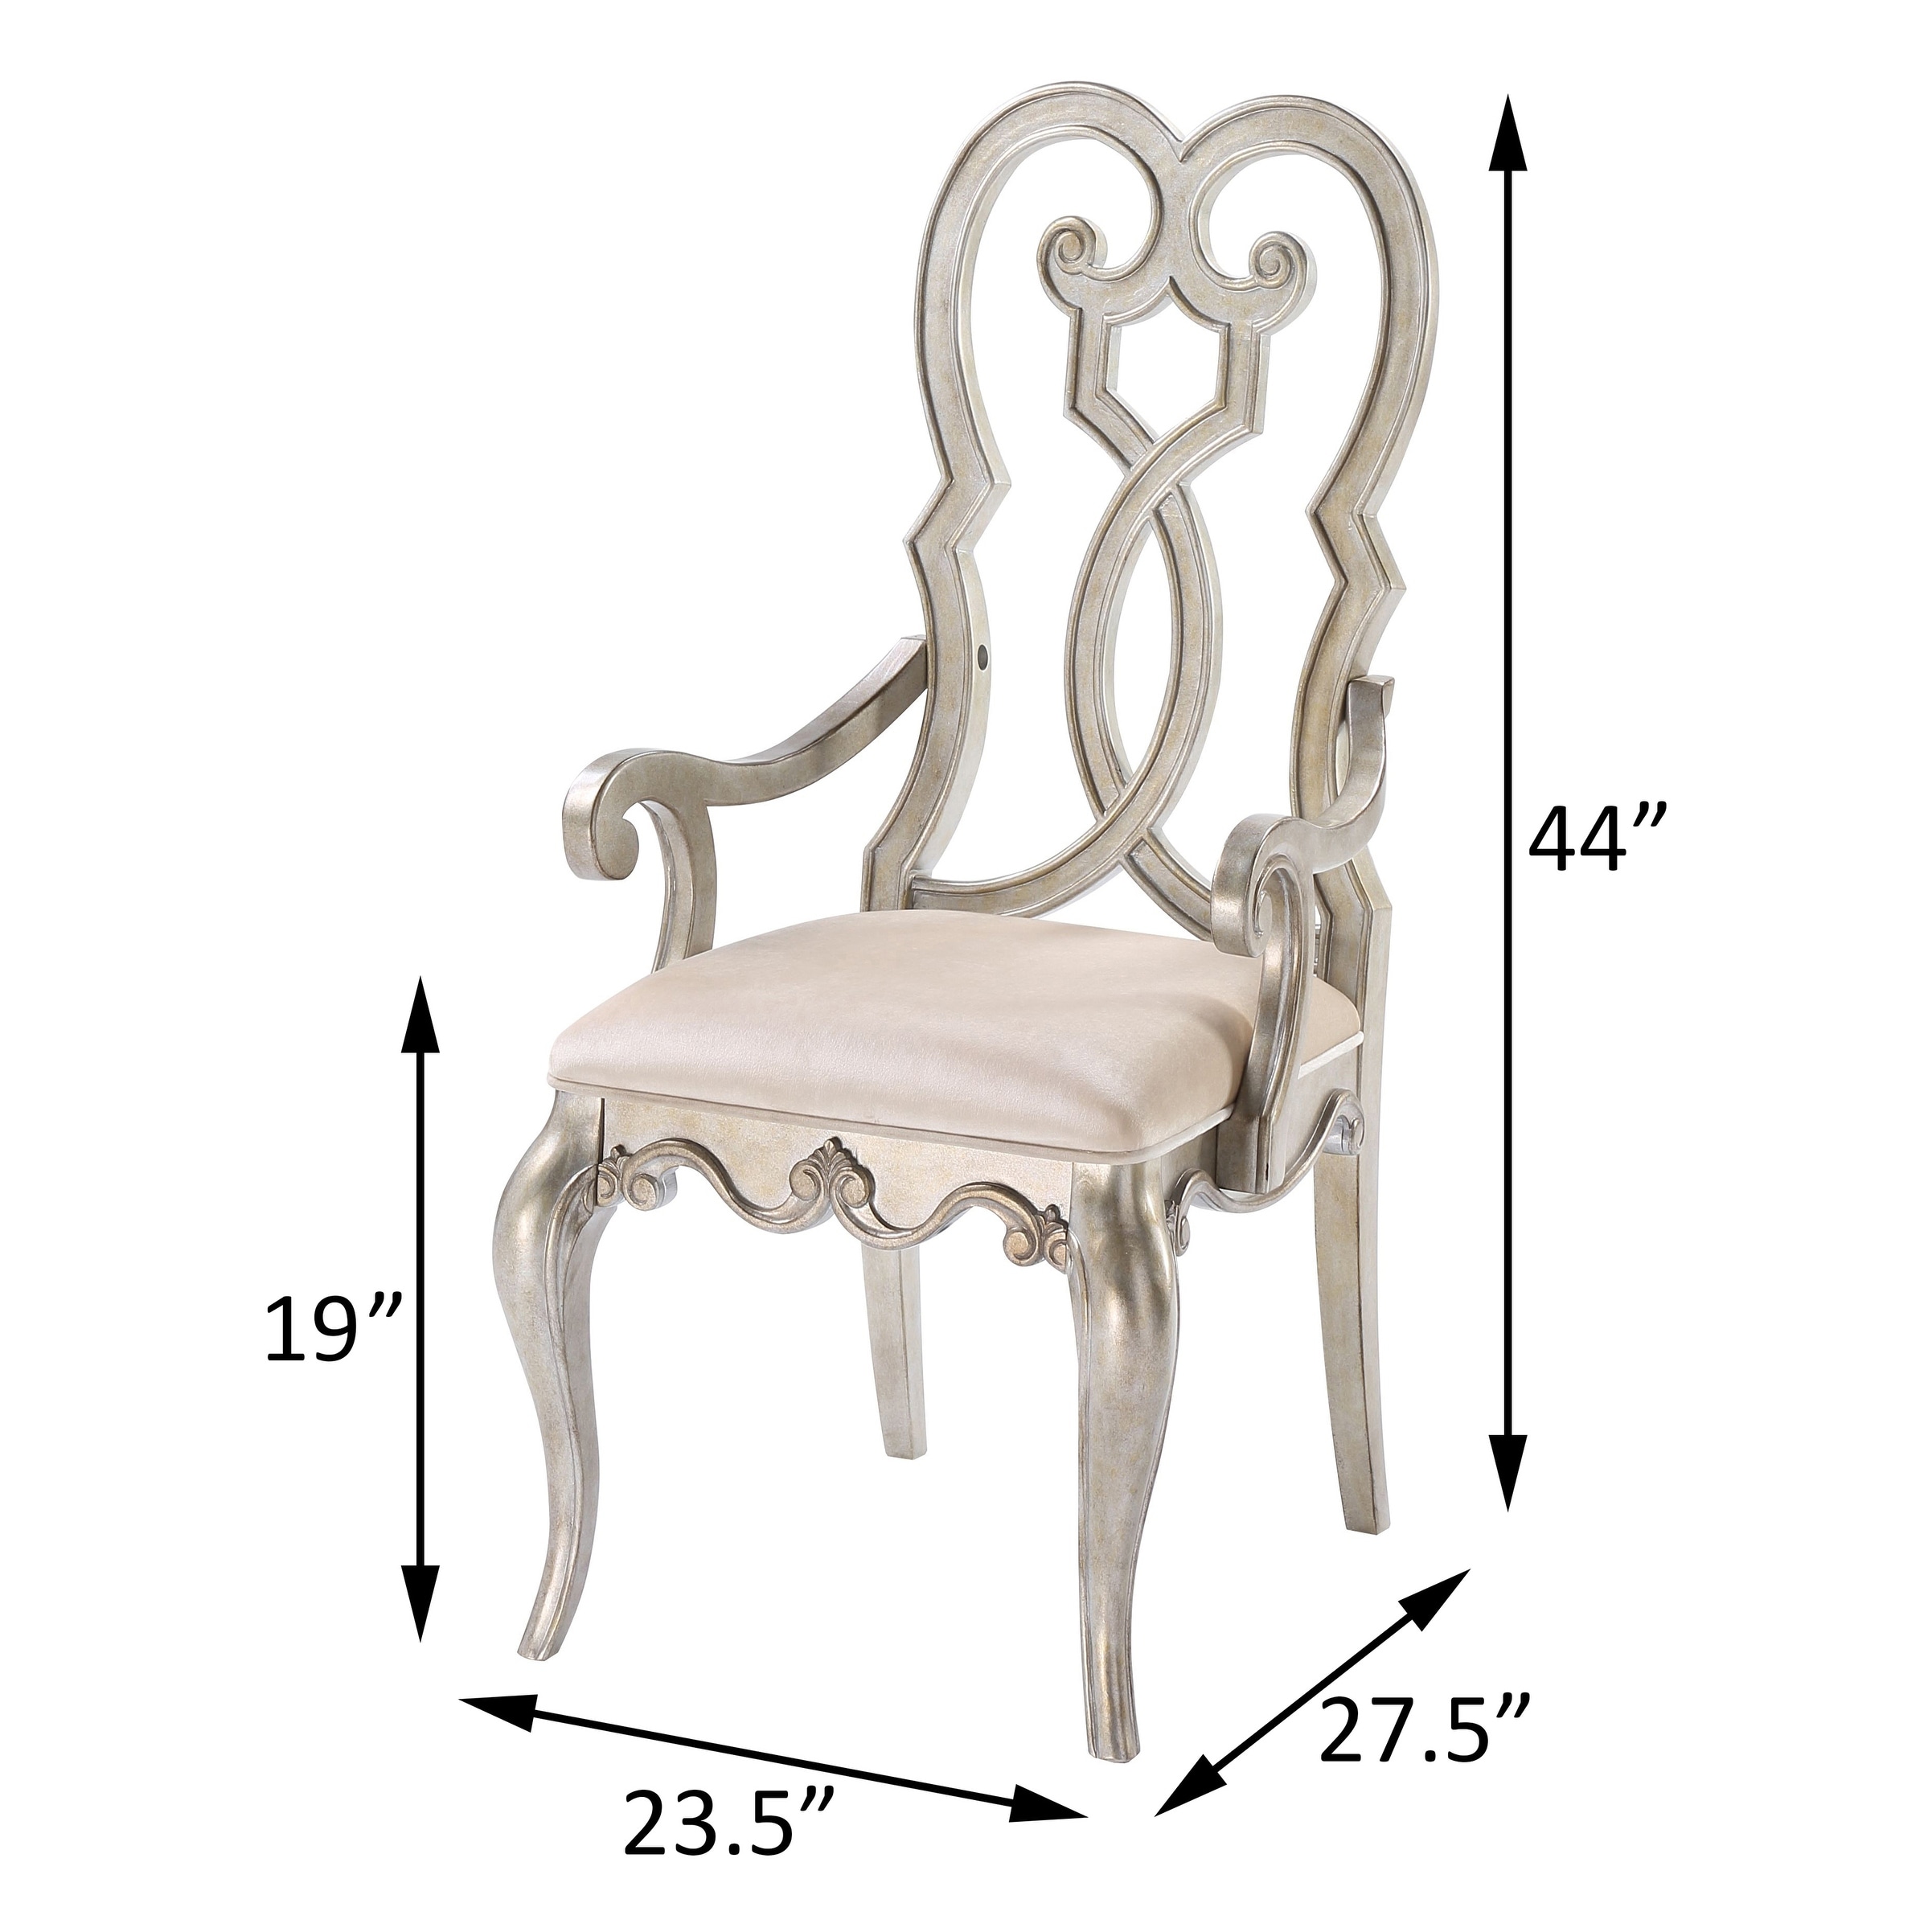 Ivory Louis Dining Chair